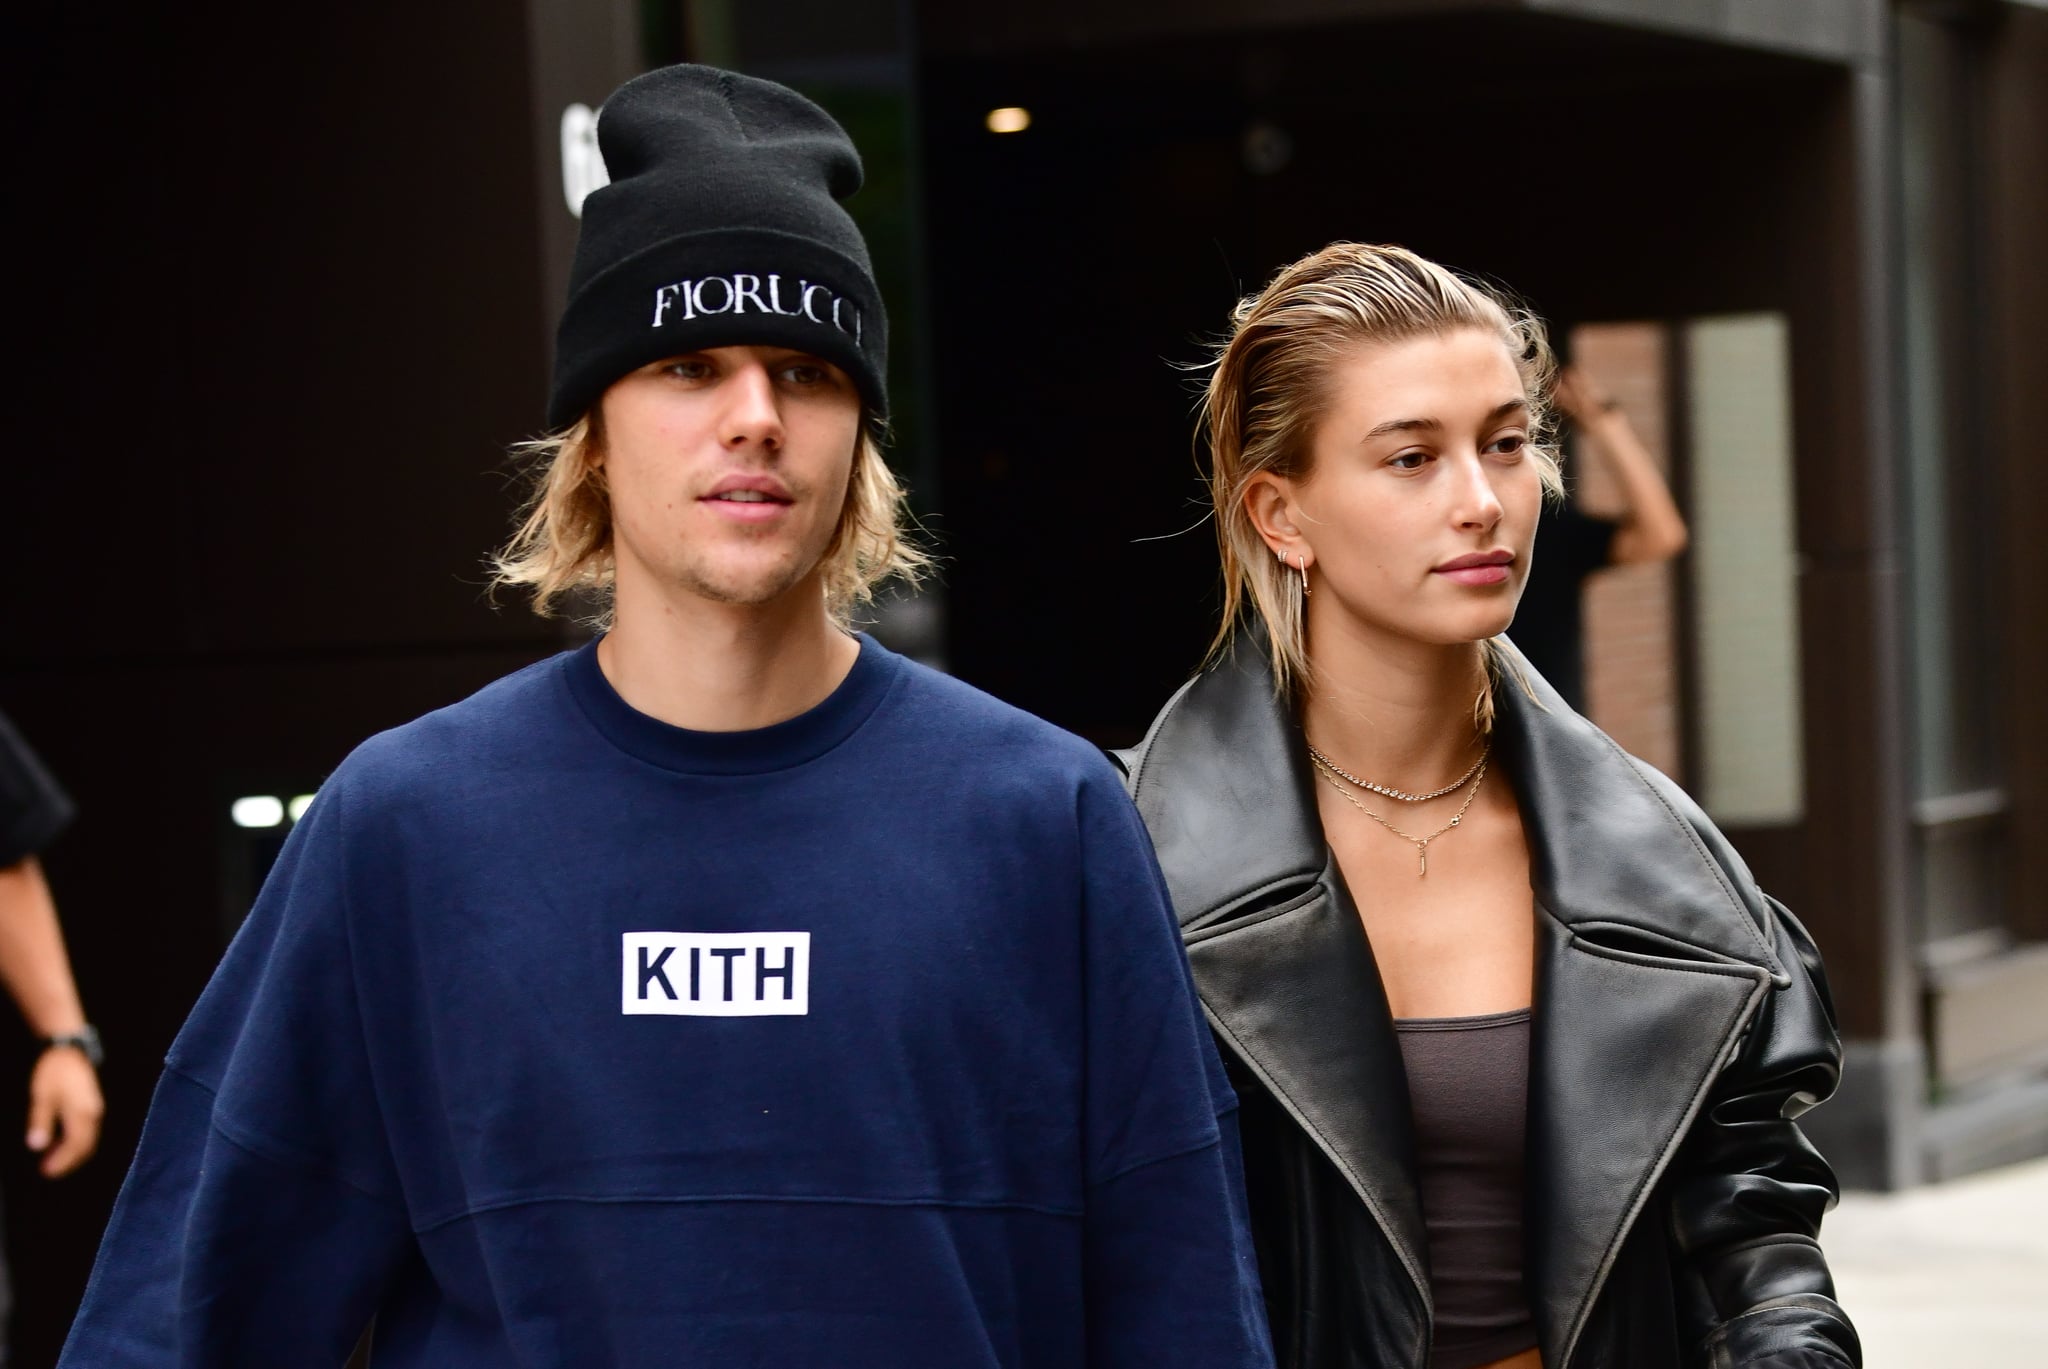 NEW YORK, NY - SEPTEMBER 14:  Justin Bieber and Hailey Baldwin seen on the streets of Brooklyn on September 14, 2018 in New York City.  (Photo by James Devaney/GC Images)